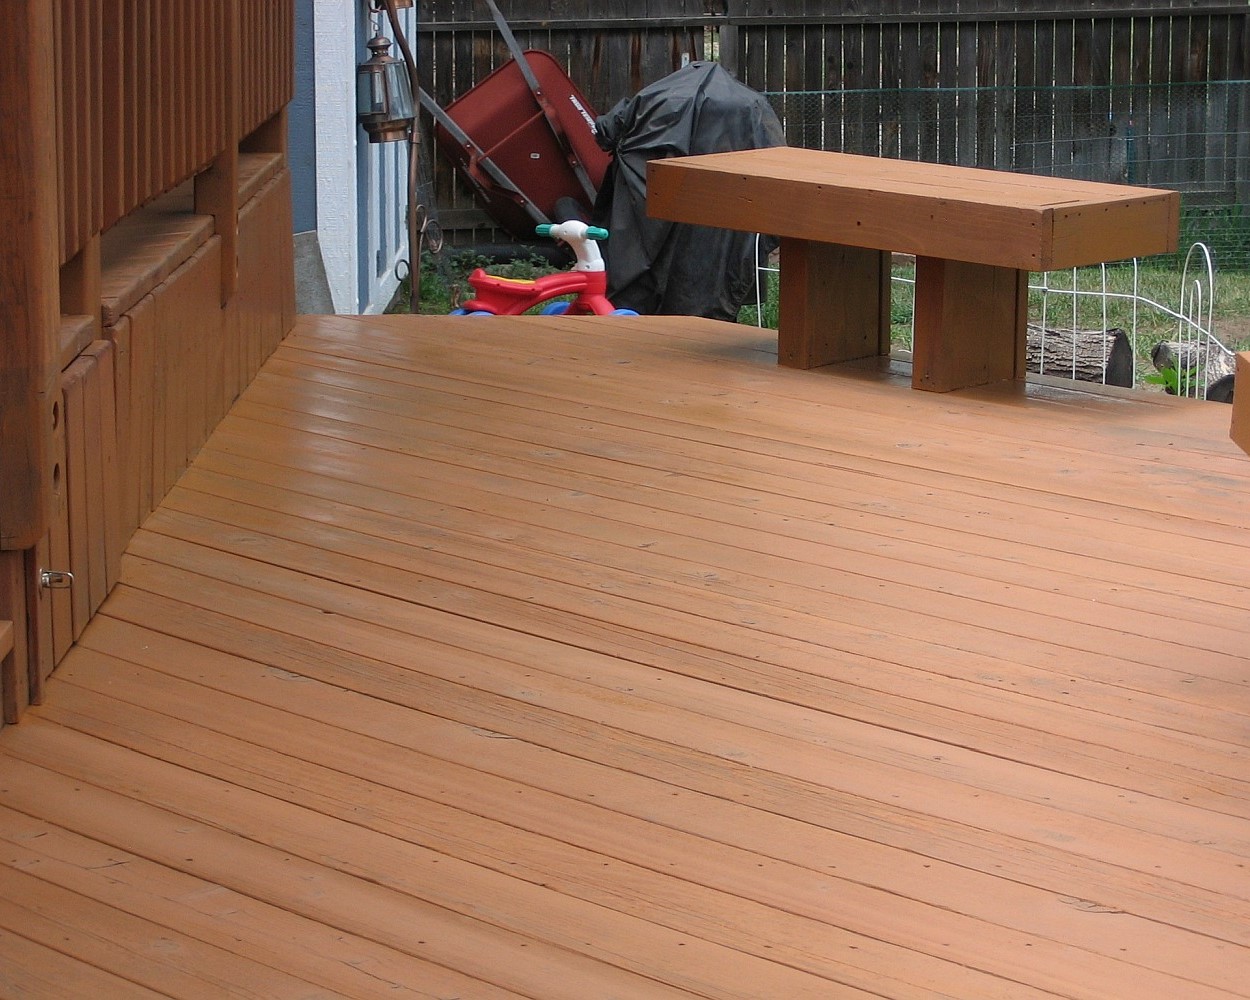 Wood deck after being refinished and stained with a Level 2